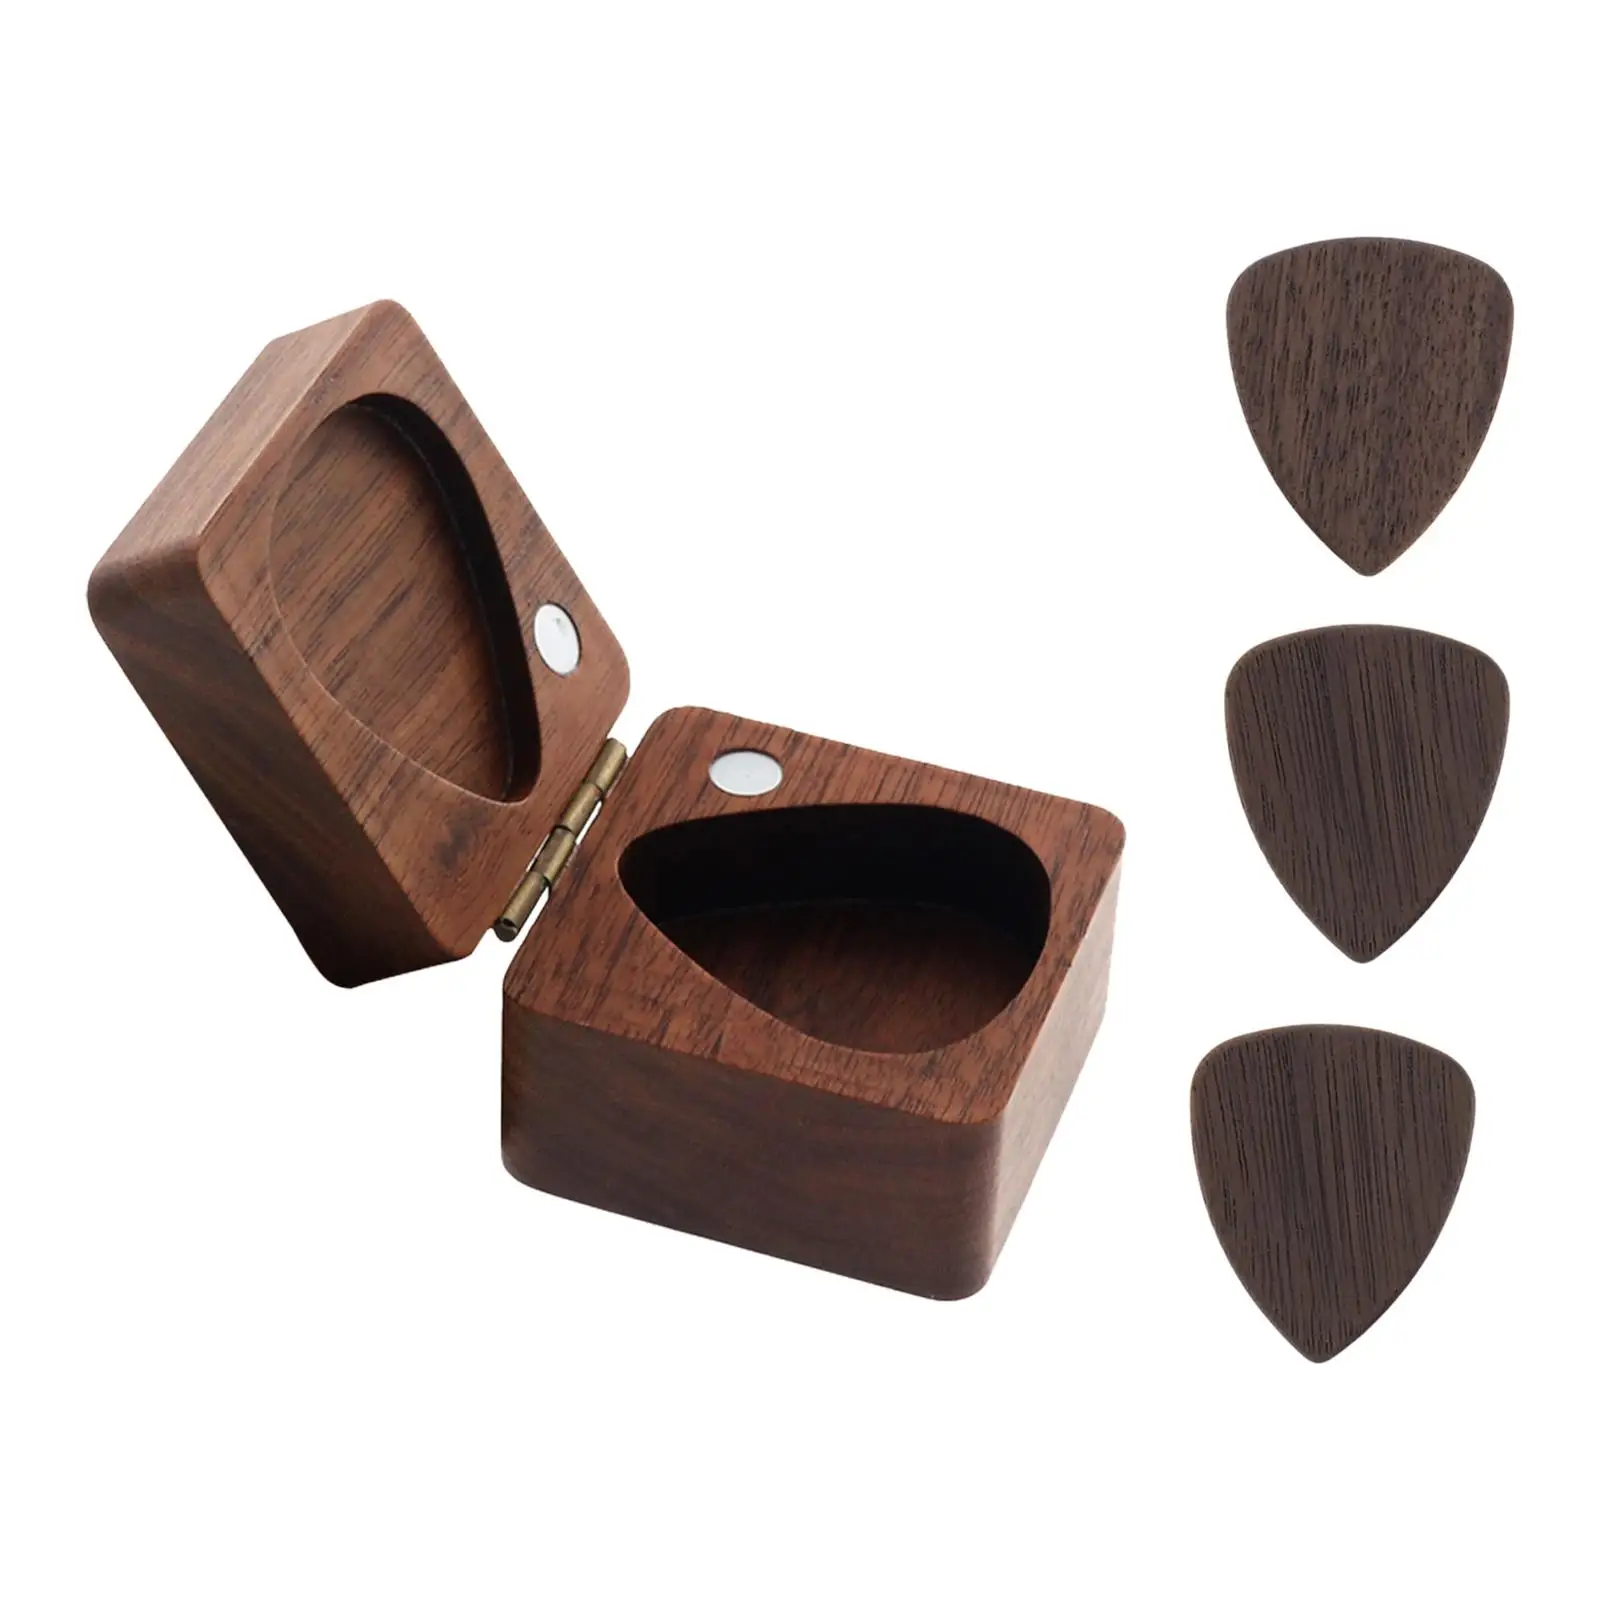 Walnut Wood Guitar Picks Case Handmade Christmas Gifts with 3 Guitar Picks Protection Guitar Accessories Holder Guitar Pick Box